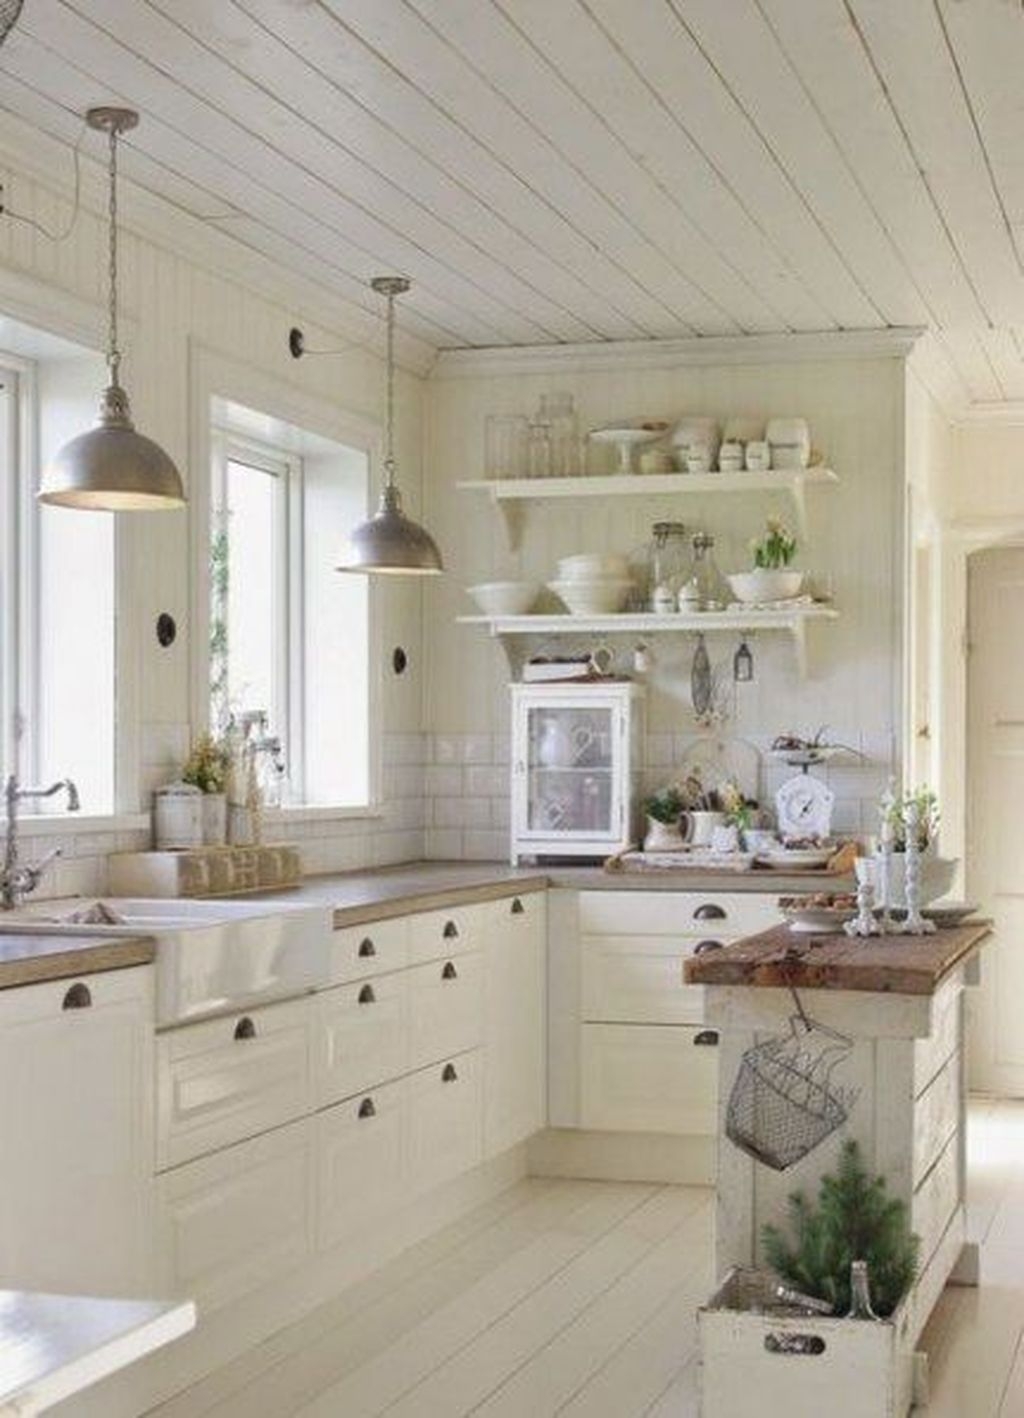 Rustic Farmhouse Kitchen Ideas To Get Traditional Accent 24